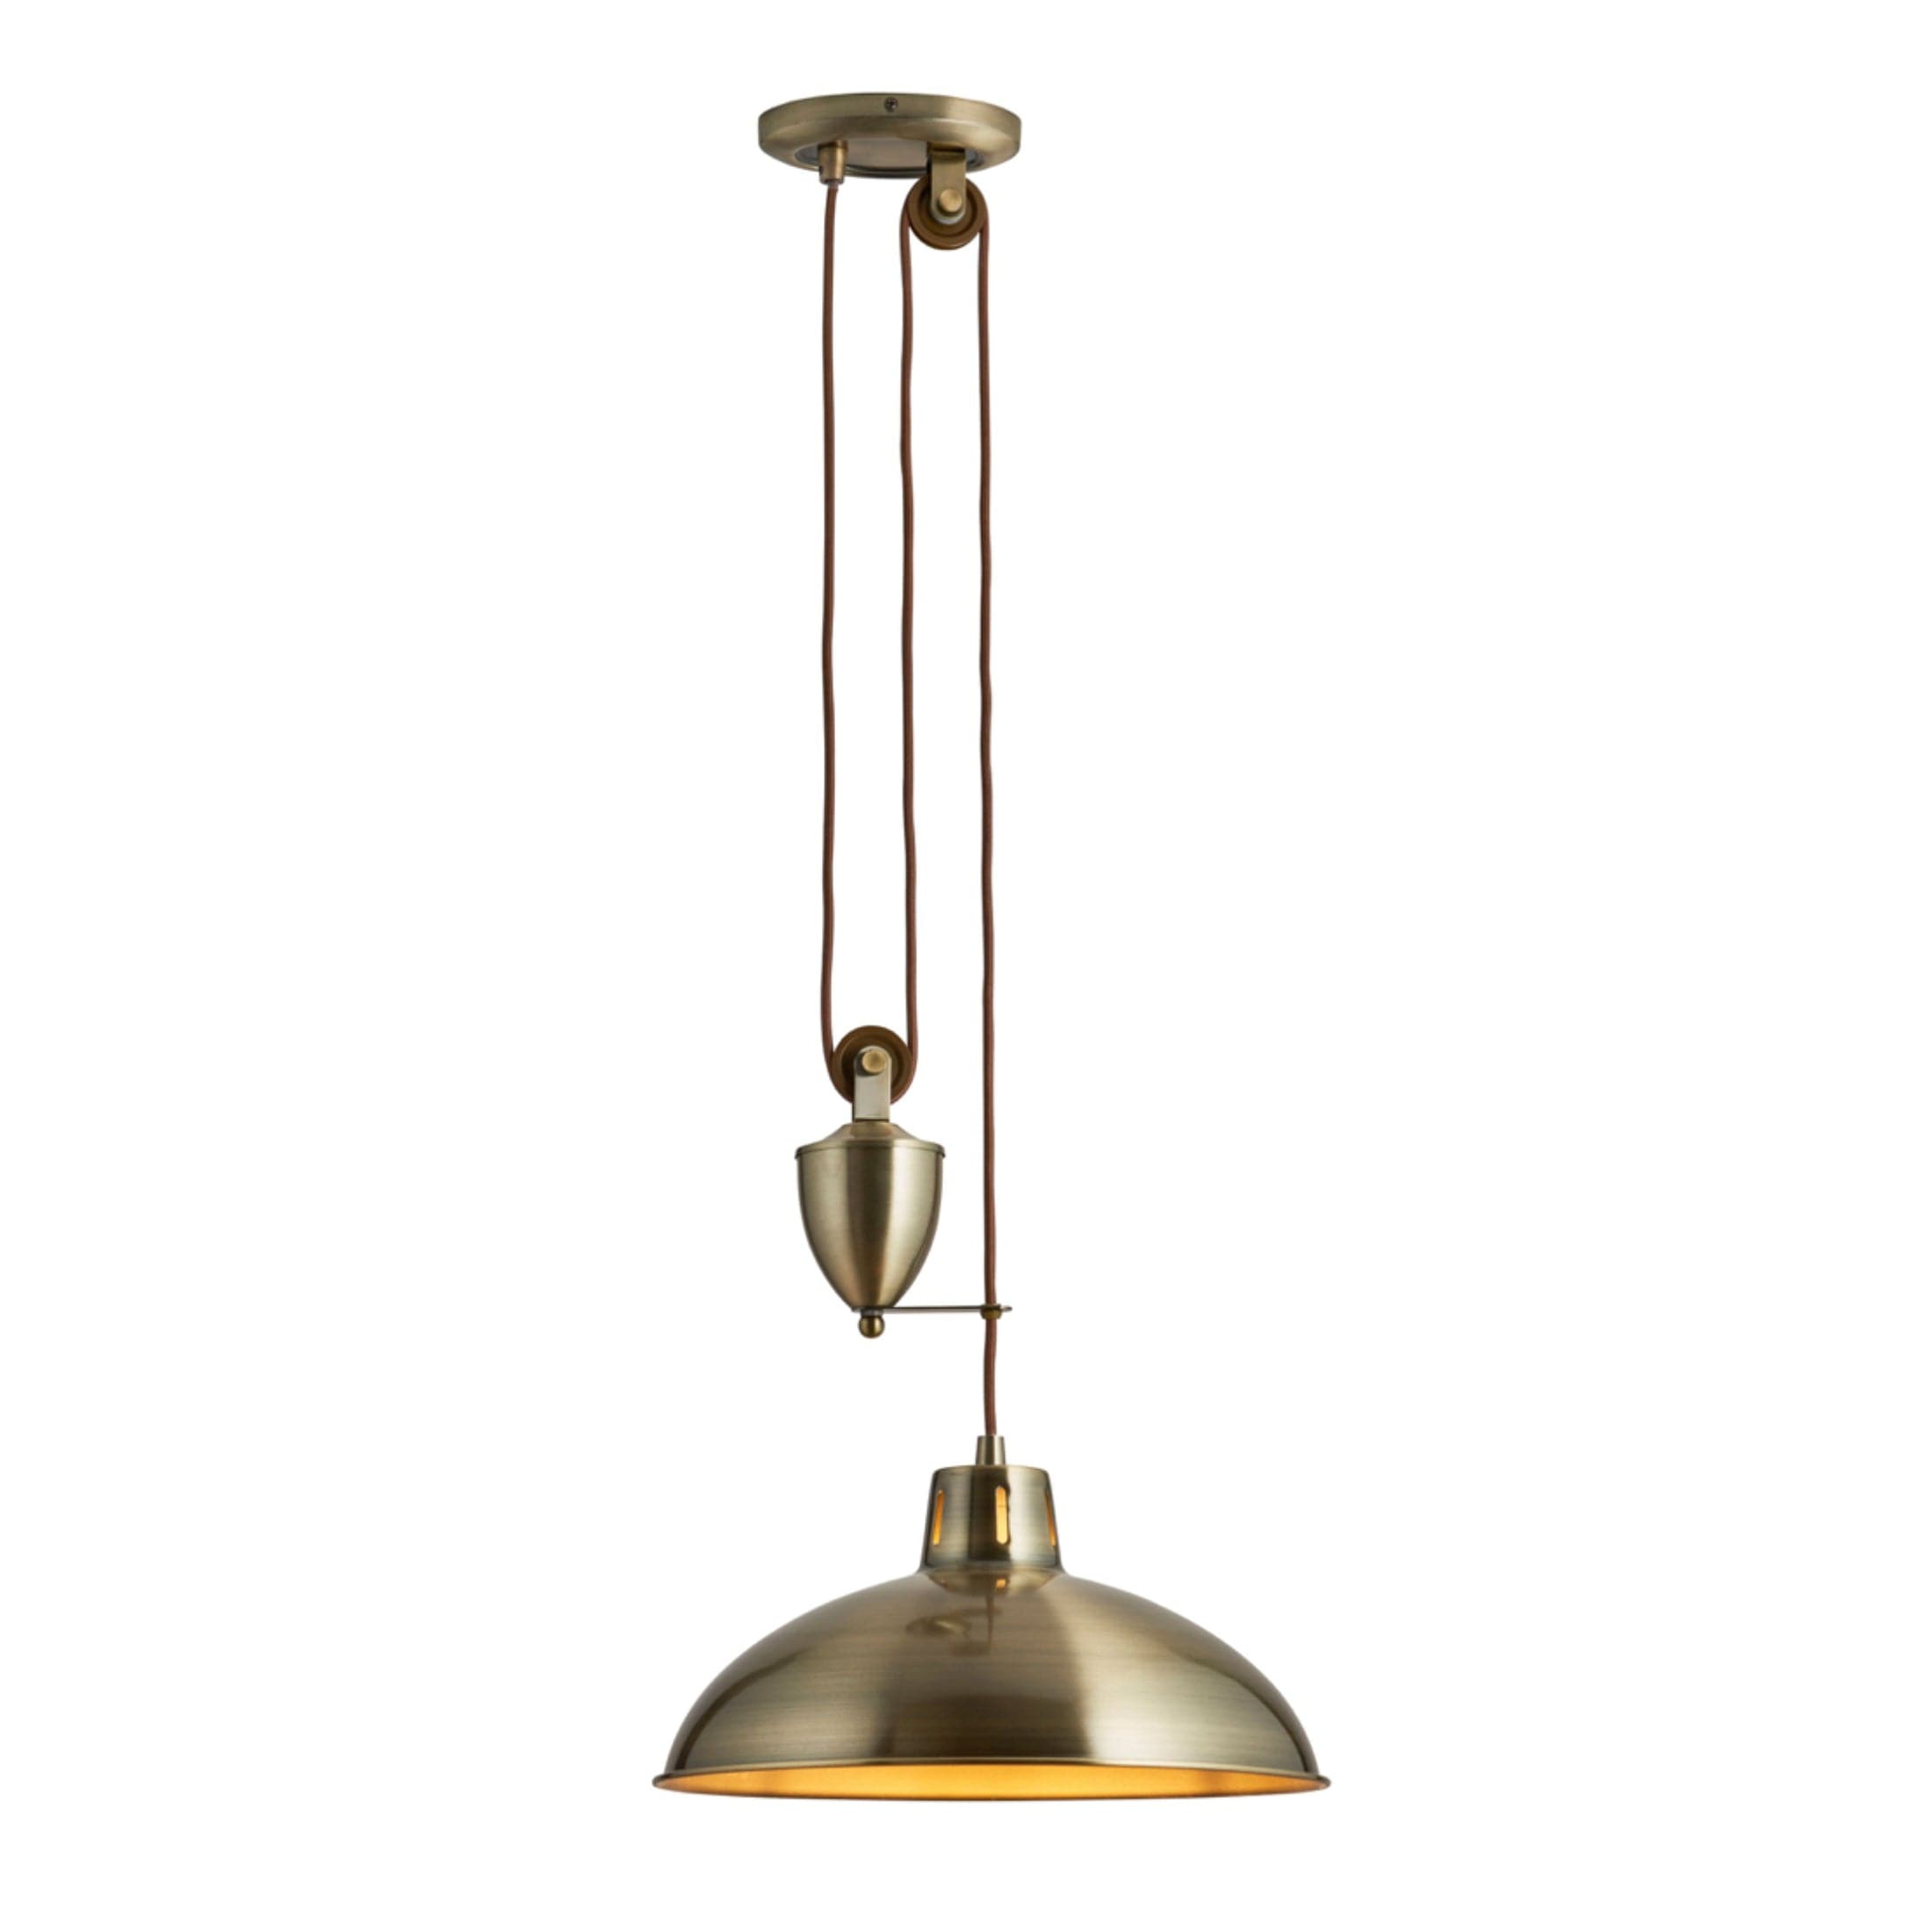 Antique Brass Rise and Fall Ceiling Pendant Light